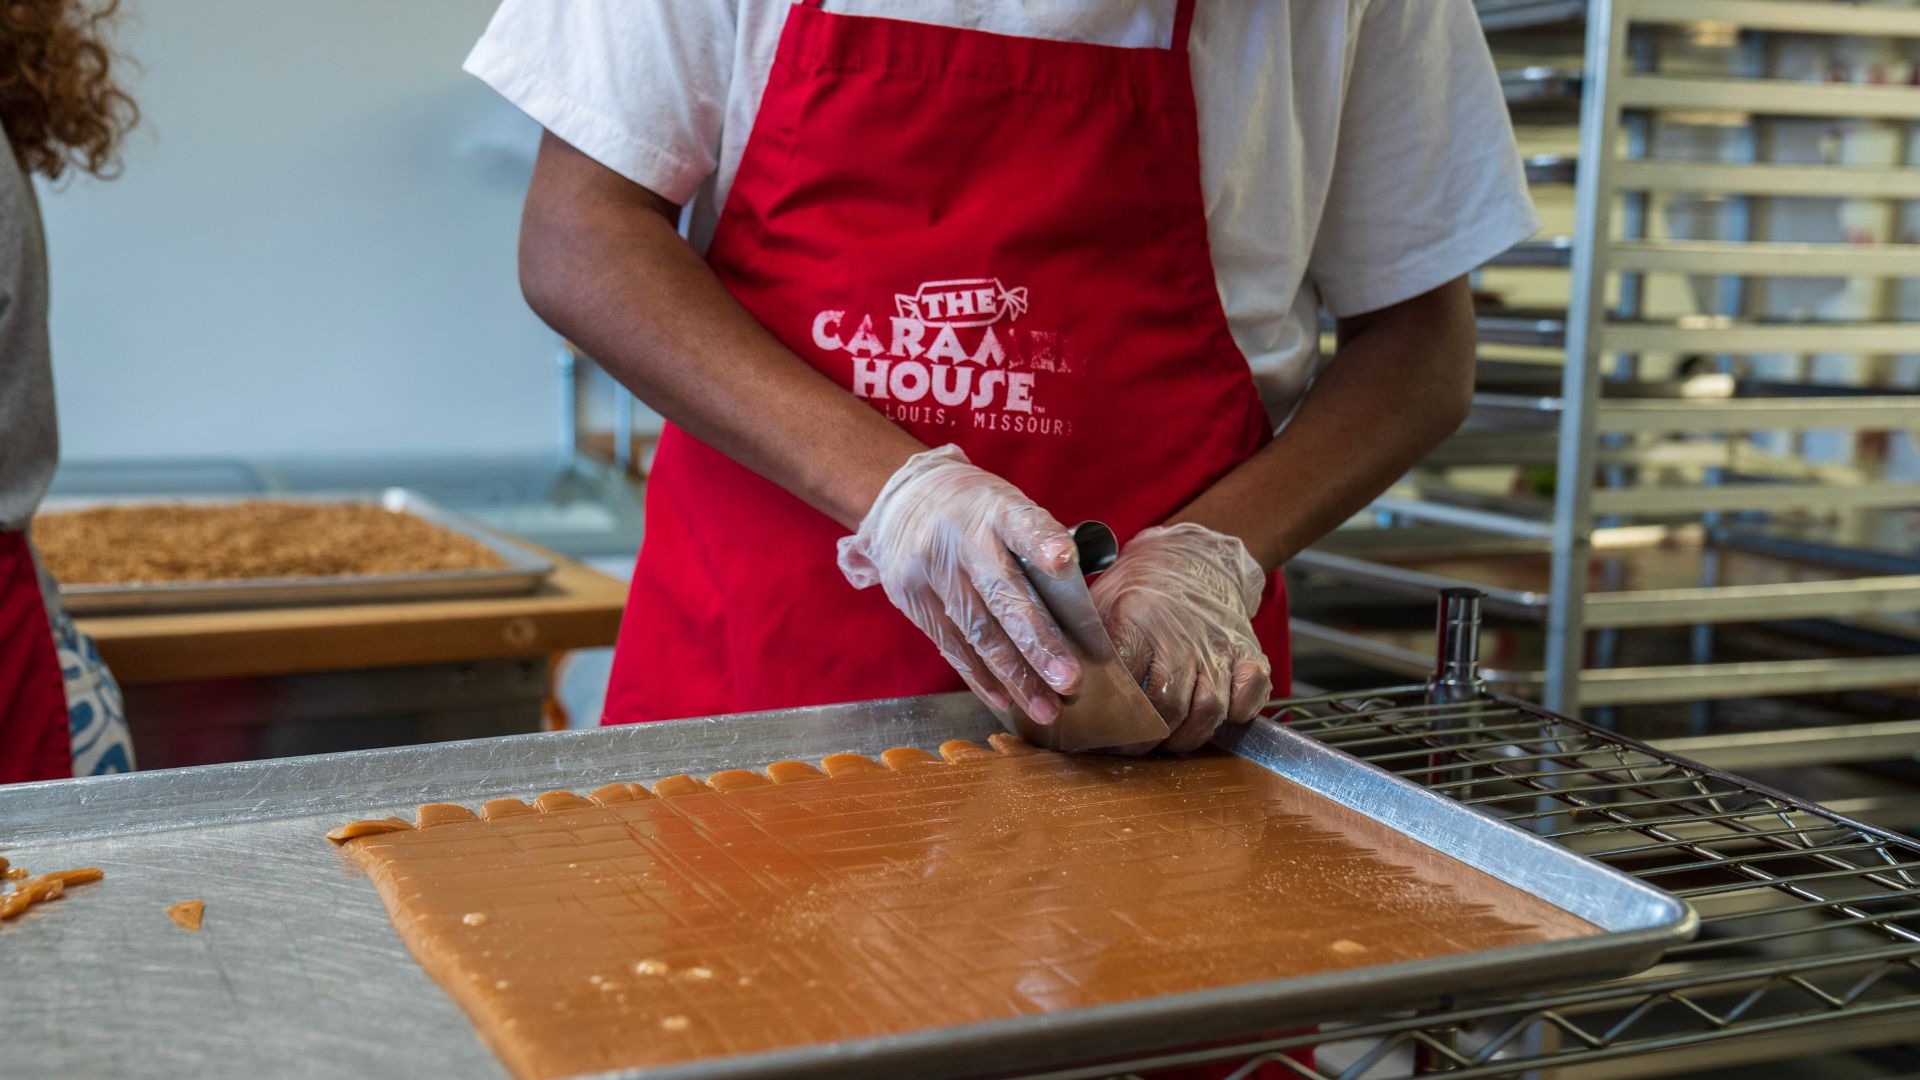 The Caramel House specializes in small-batch caramel candy.